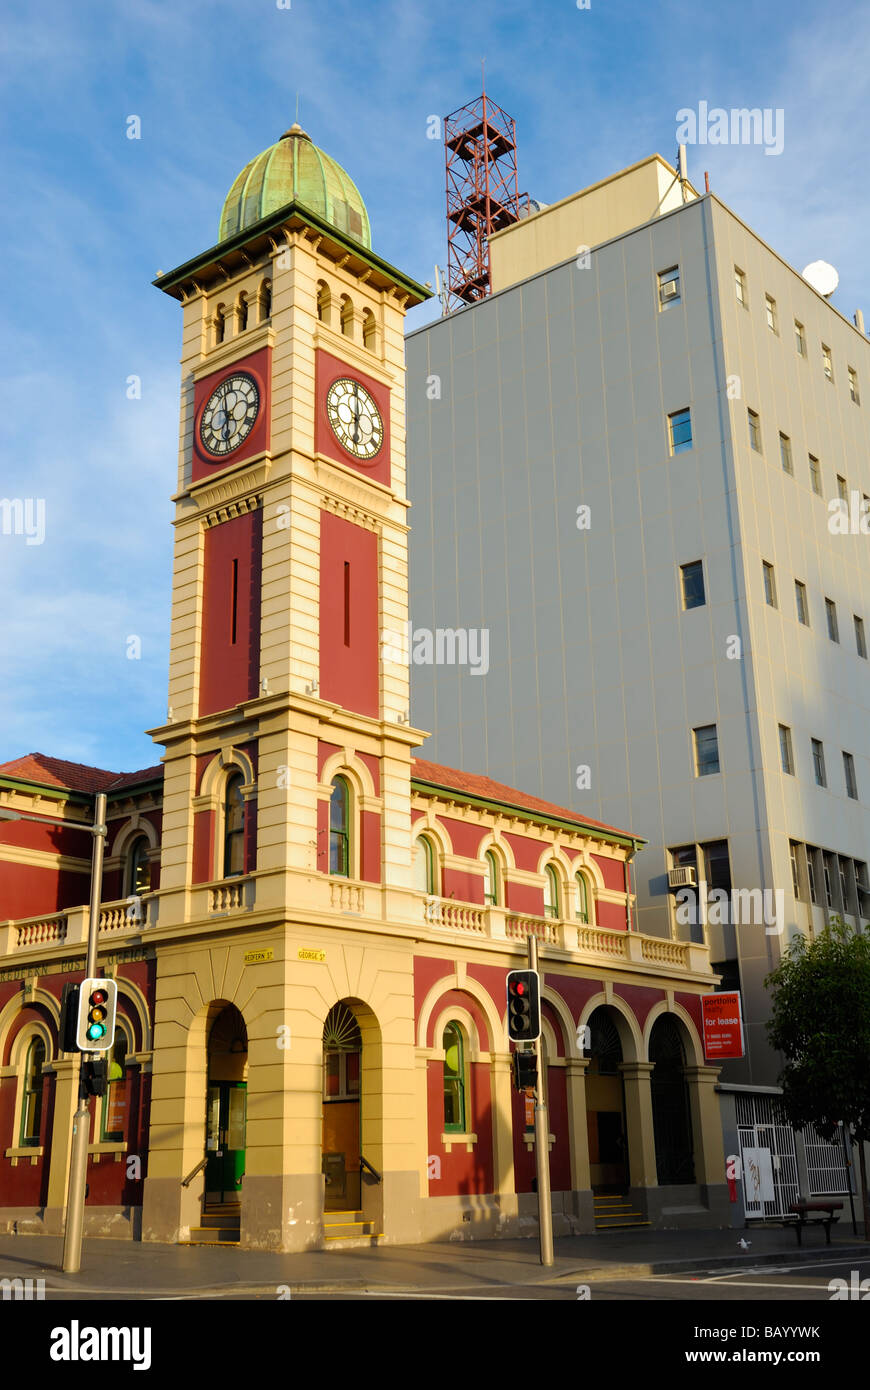 Redfern Post Office Sydney, with clock tower. The architecture is typical of Victorian post office buildings in Australia. Stock Photo